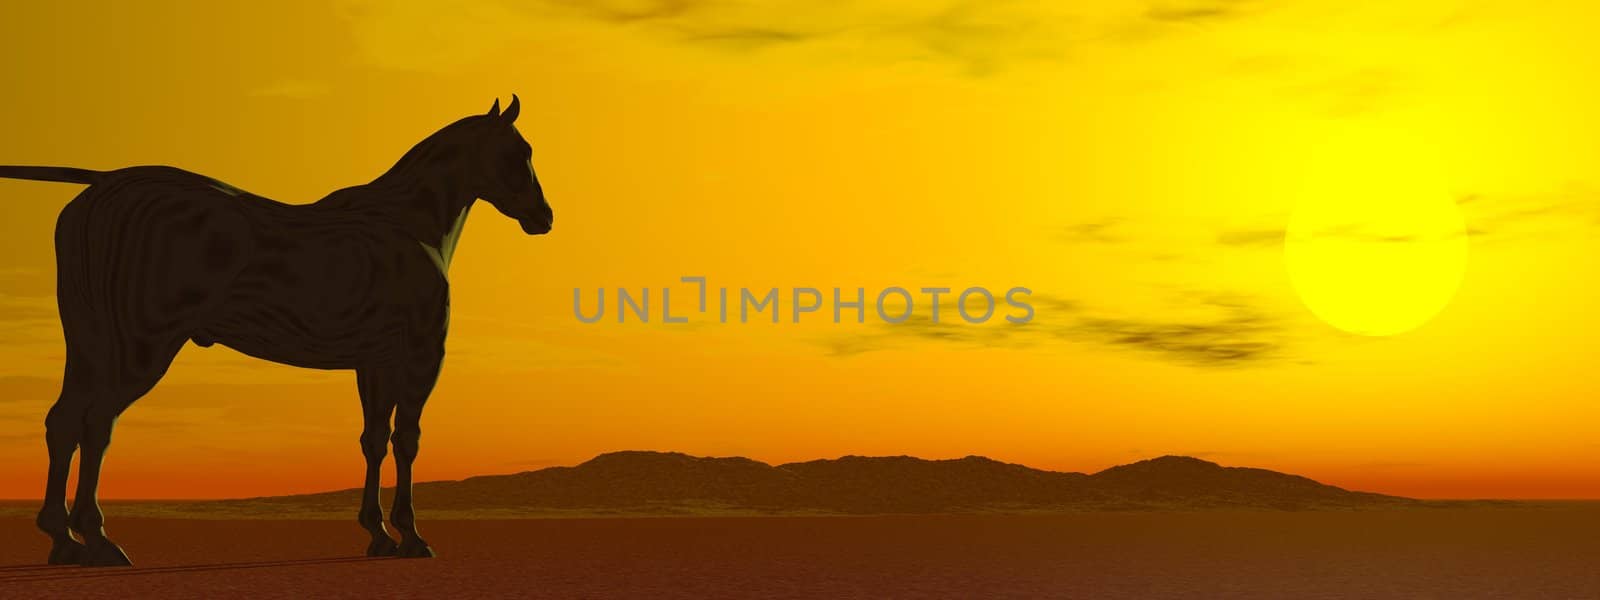 Calm horse standing in the desert while contemplating sunset upon the hills